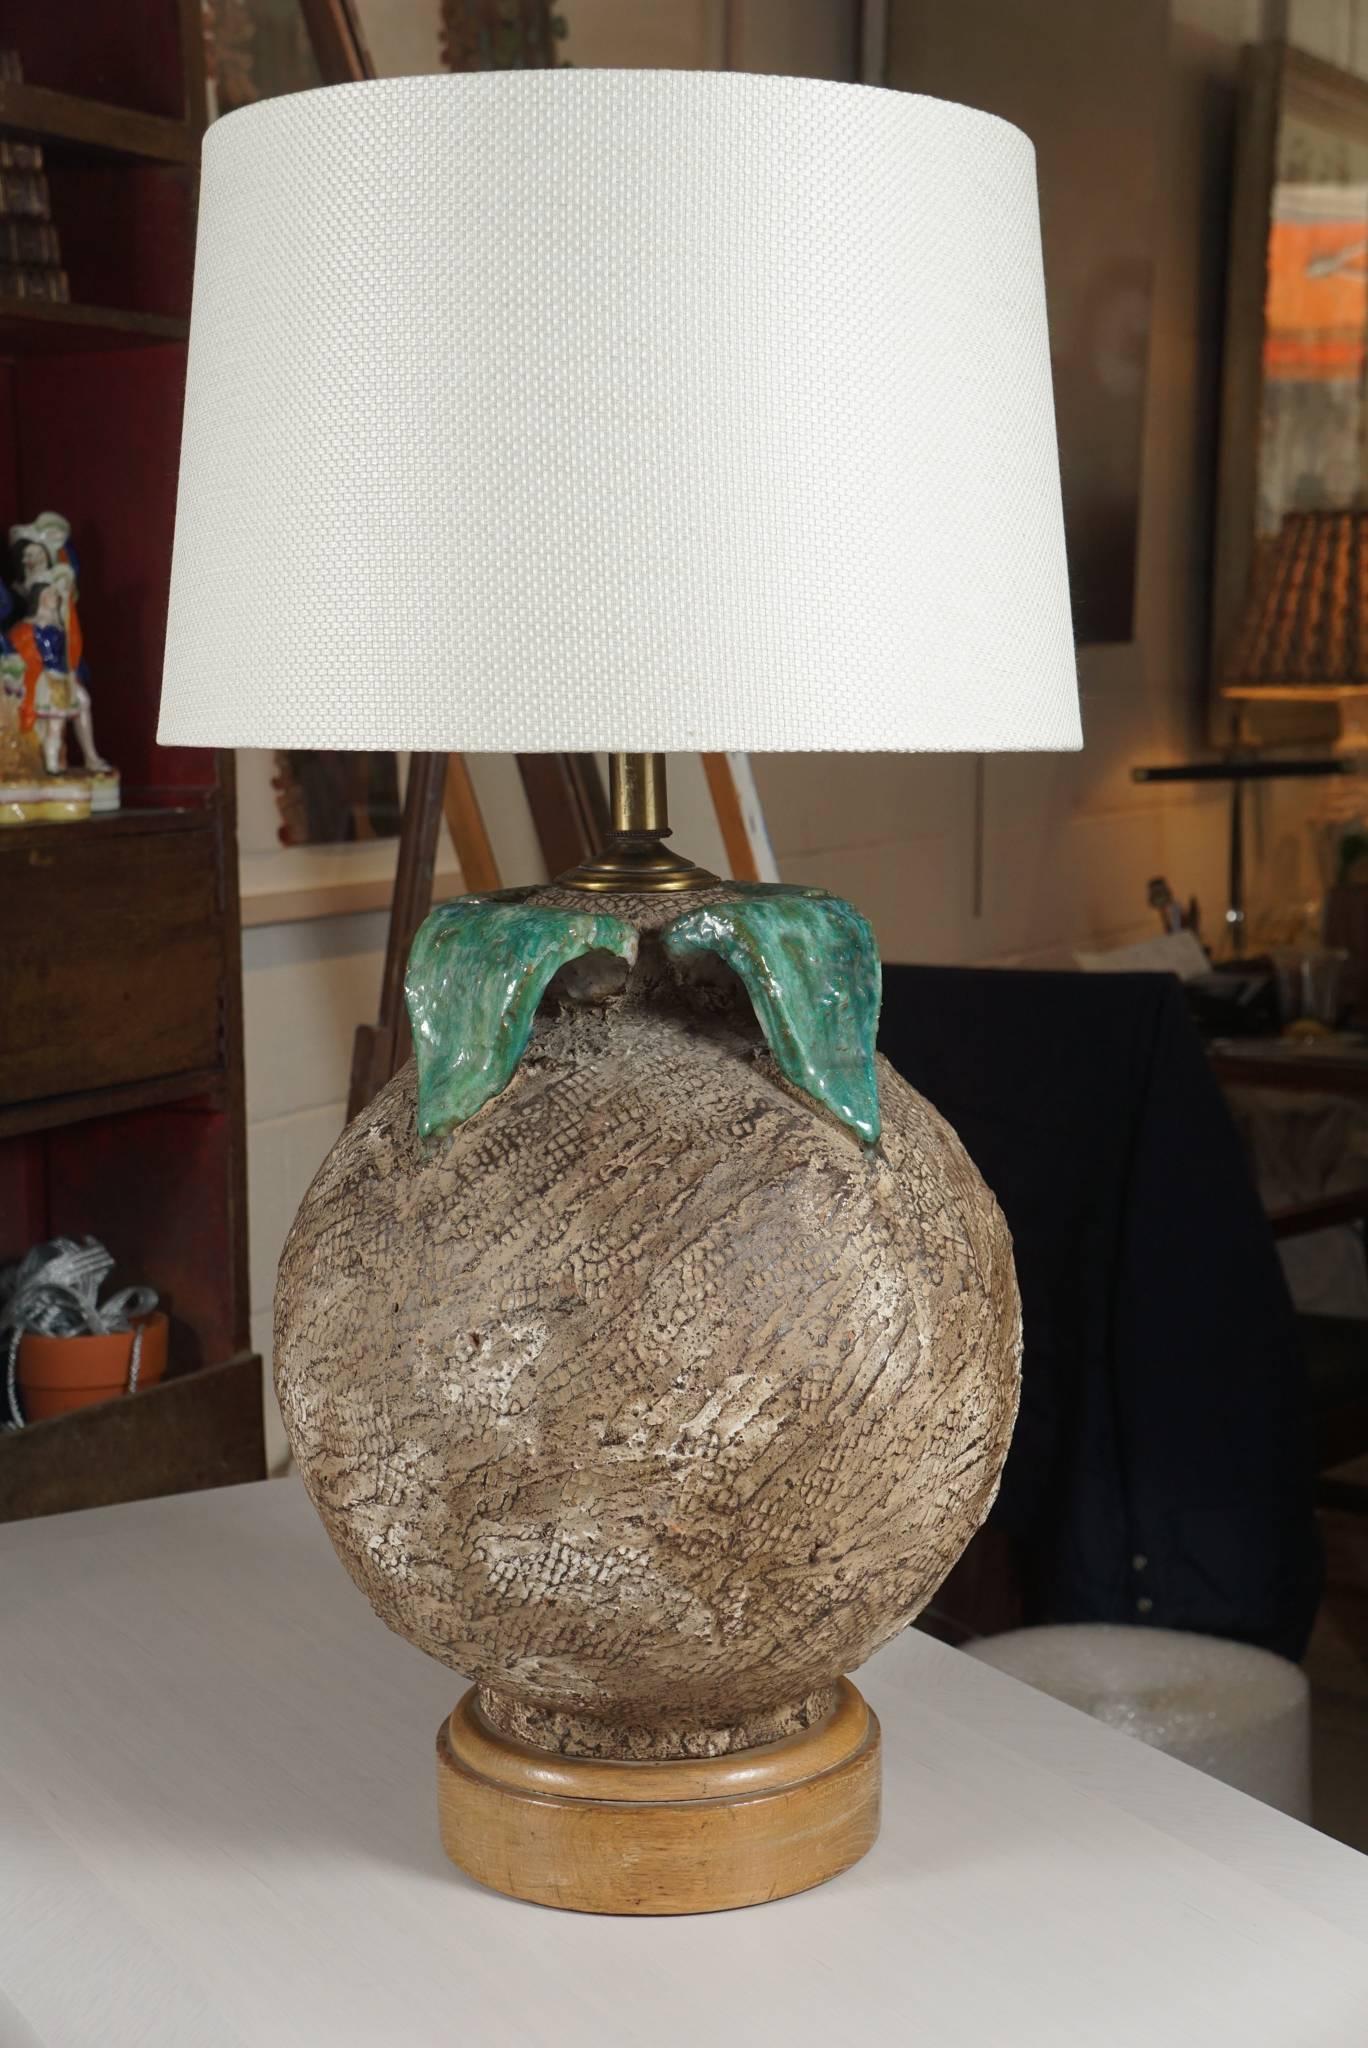 Here is a unique ceramic lamp with a textured surface in the shape of a persimmon.
The leaf top has a high gloss finish n the style of Majolica.
The lamp has been rewired and has new brass double socket and hardware.
The lamp has a great light